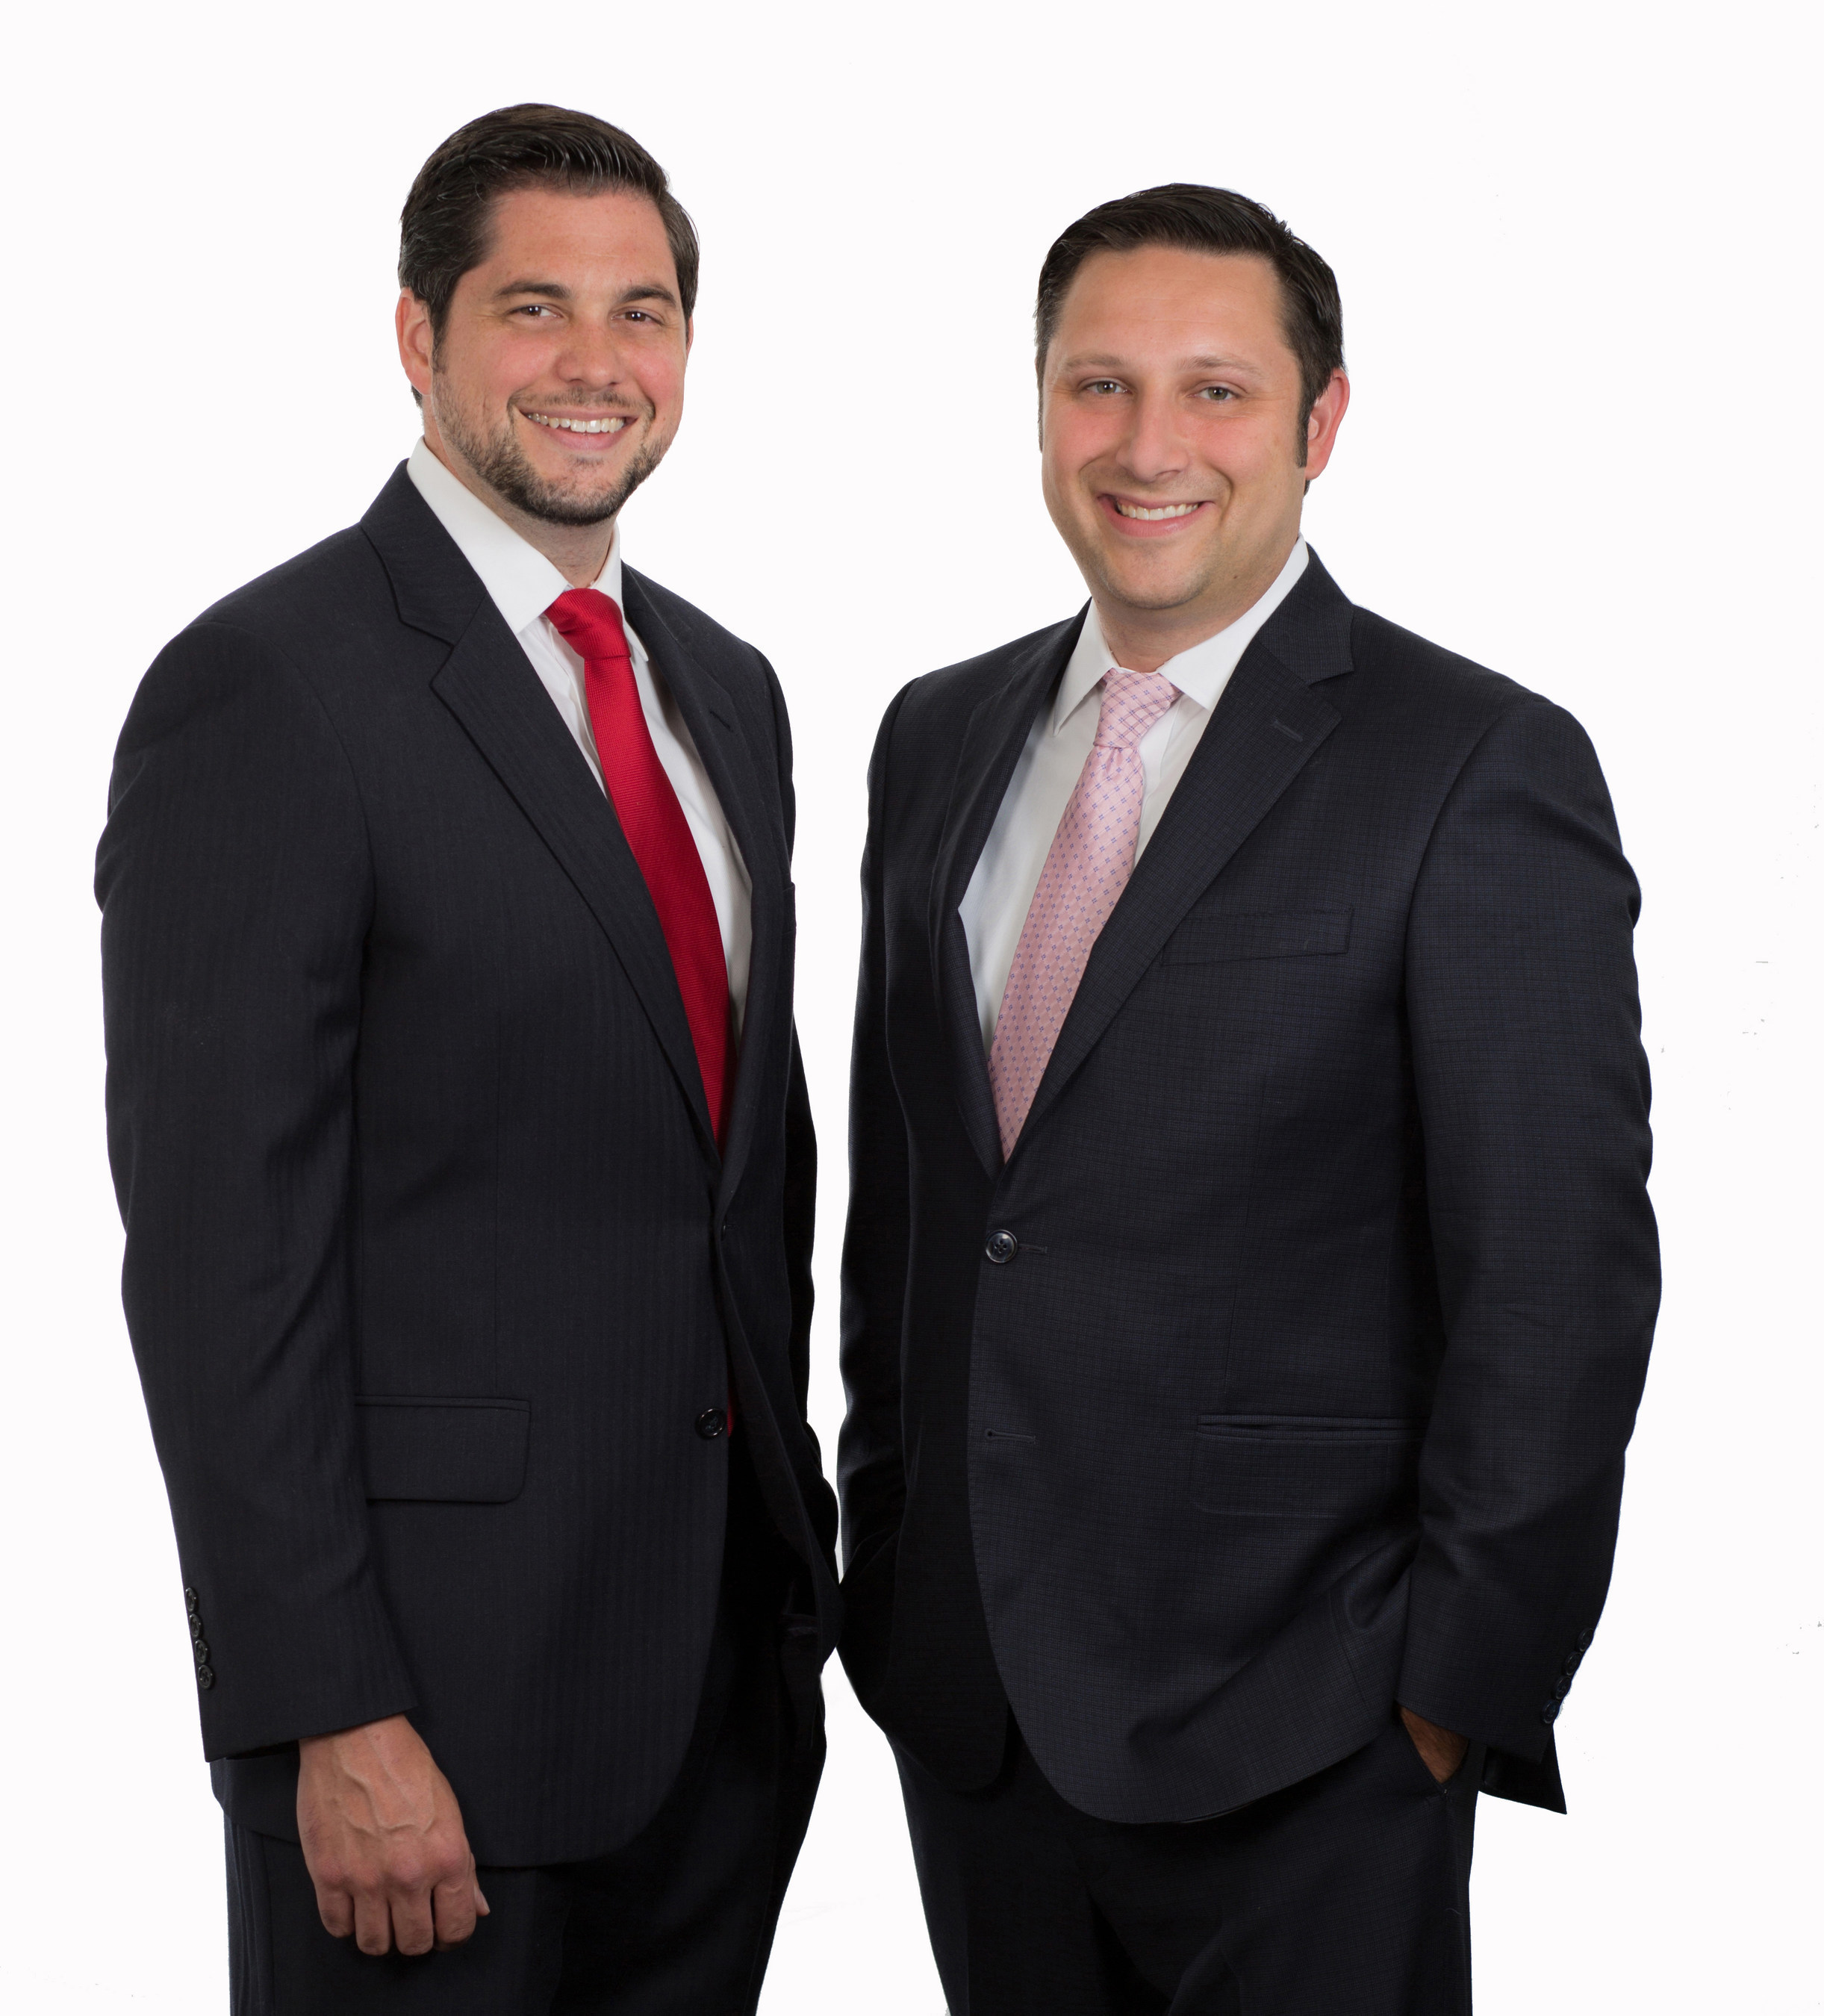 Ostrow Reisin Berk & Abrams, Ltd. (ORBA) is proud to announce that James Pellino (left) and Adam Levine have recently been elected as Directors, effective July 1. Both Pellino and Levine manage audits, reviews and monthly accounting engagements for clients across various industries.